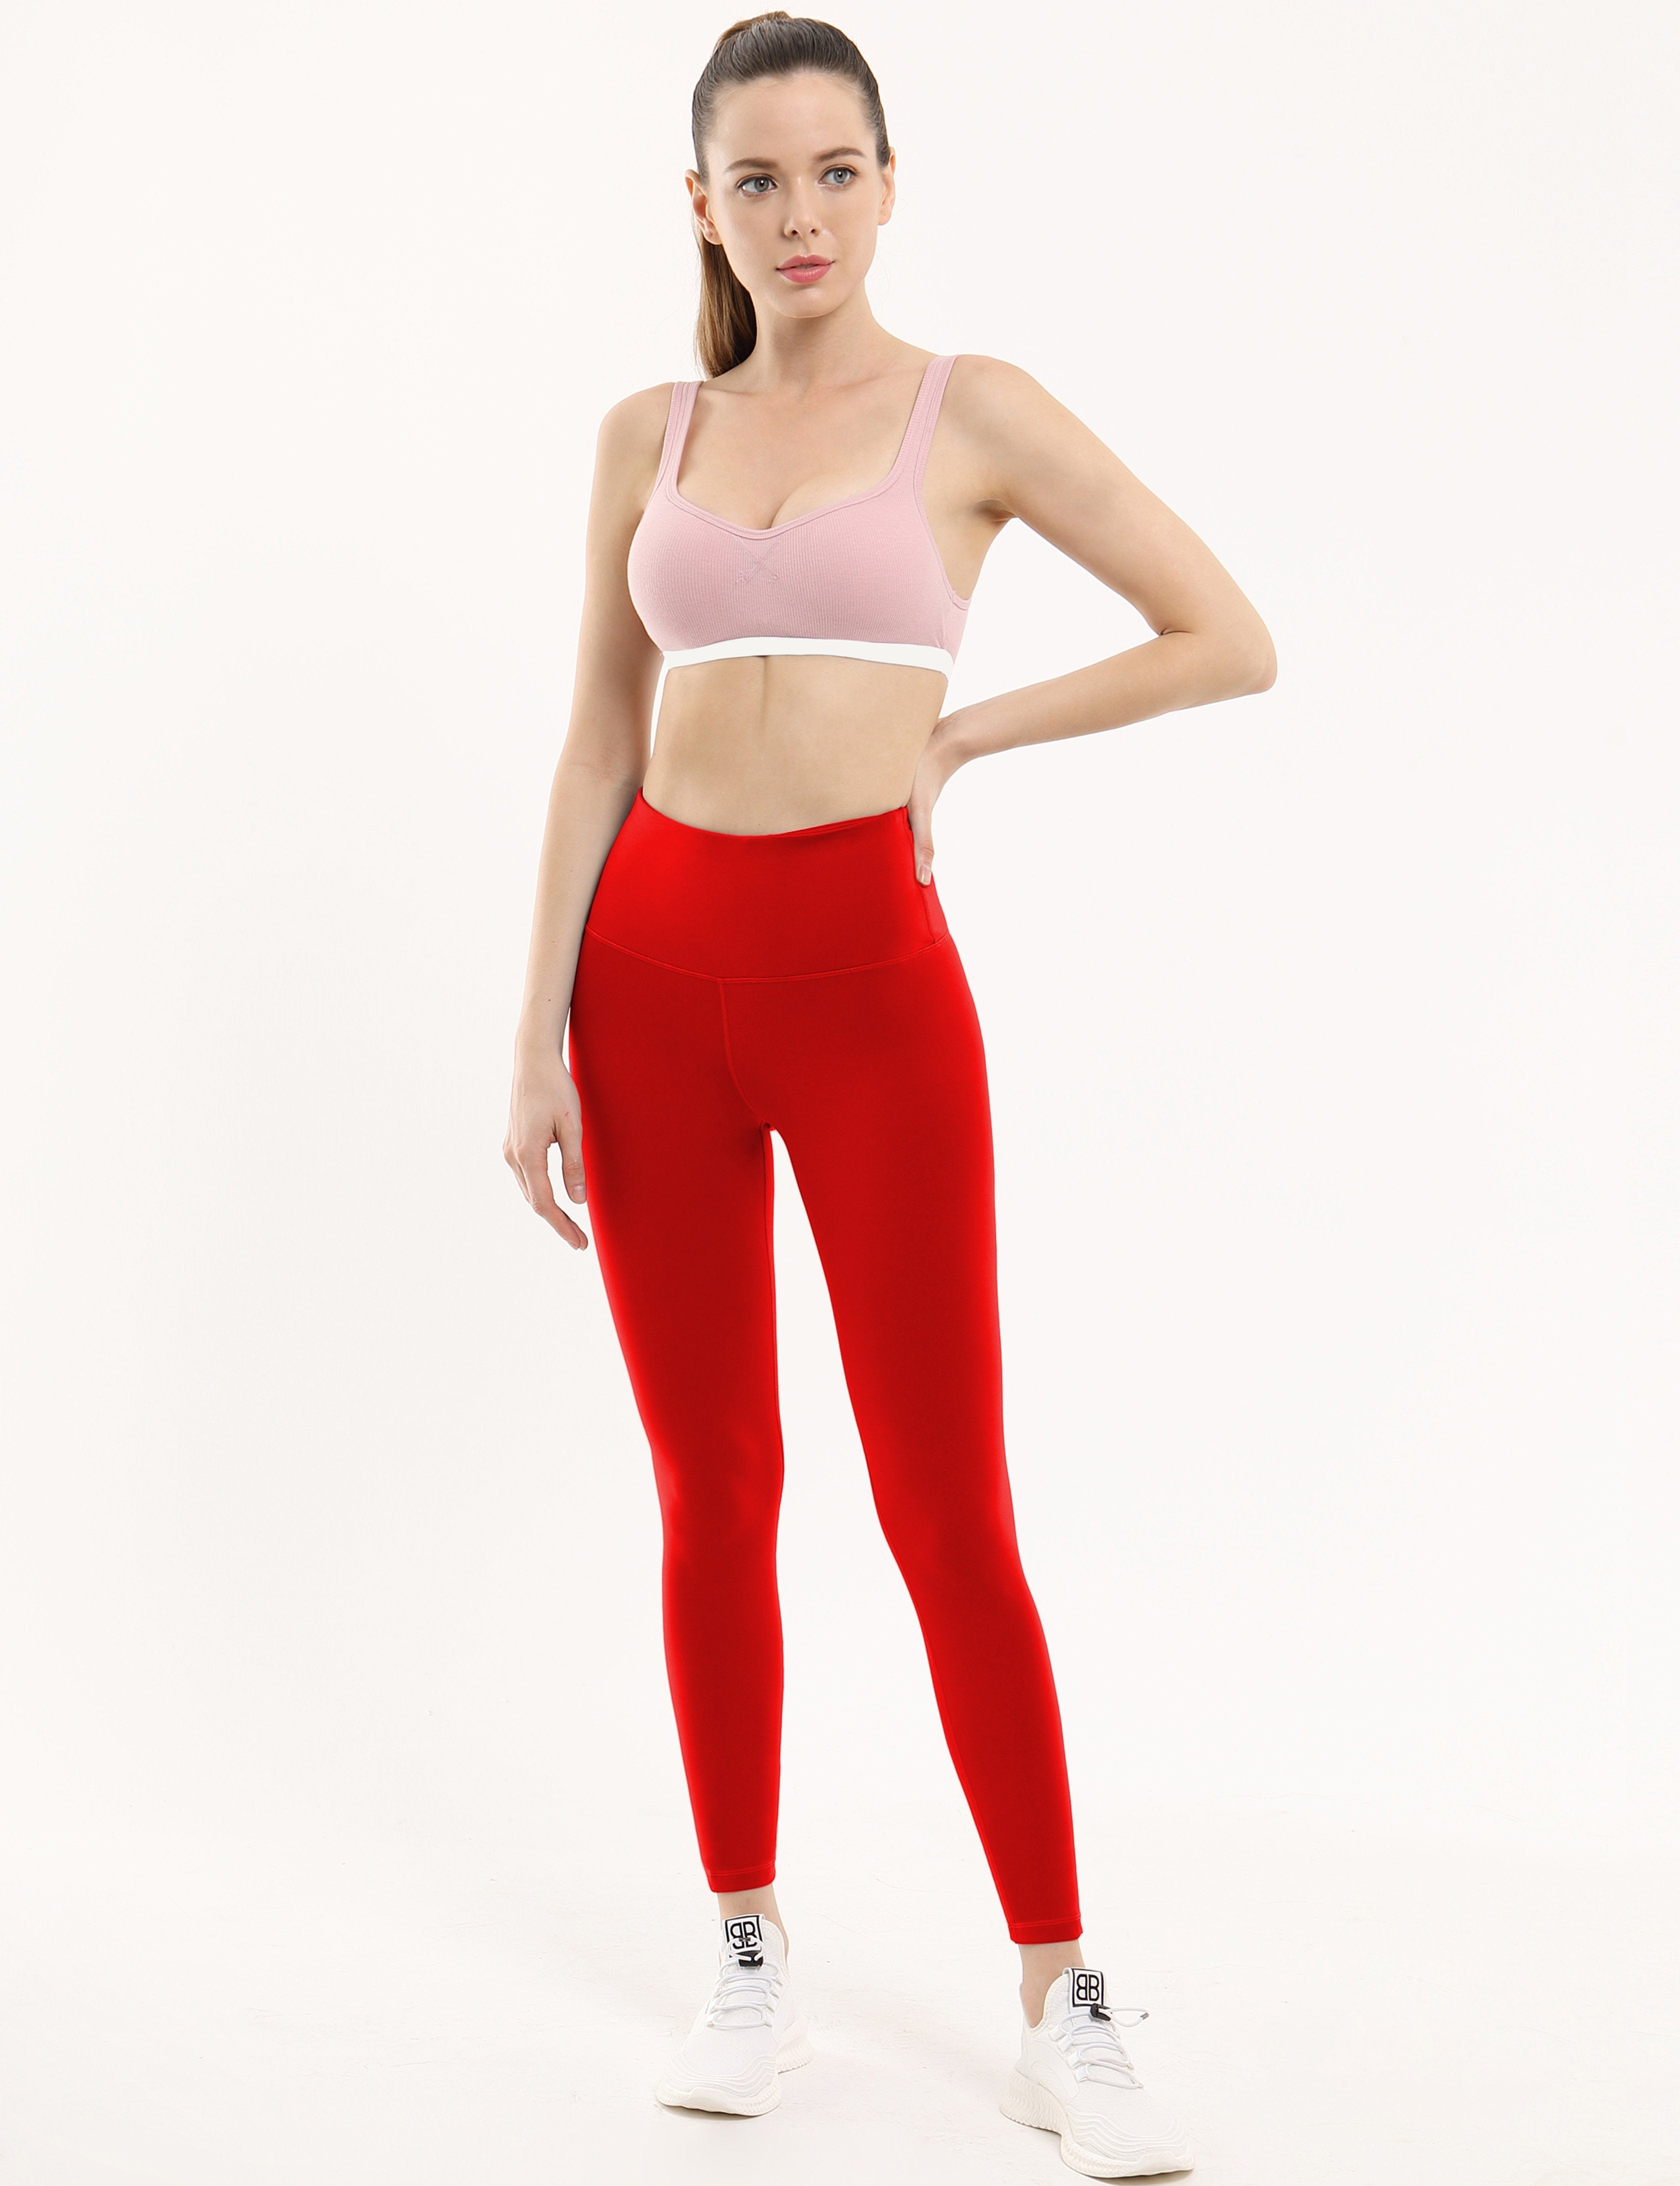 High Waist Golf Pants scarlet 75%Nylon/25%Spandex Fabric doesn't attract lint easily 4-way stretch No see-through Moisture-wicking Tummy control Inner pocket Four lengths